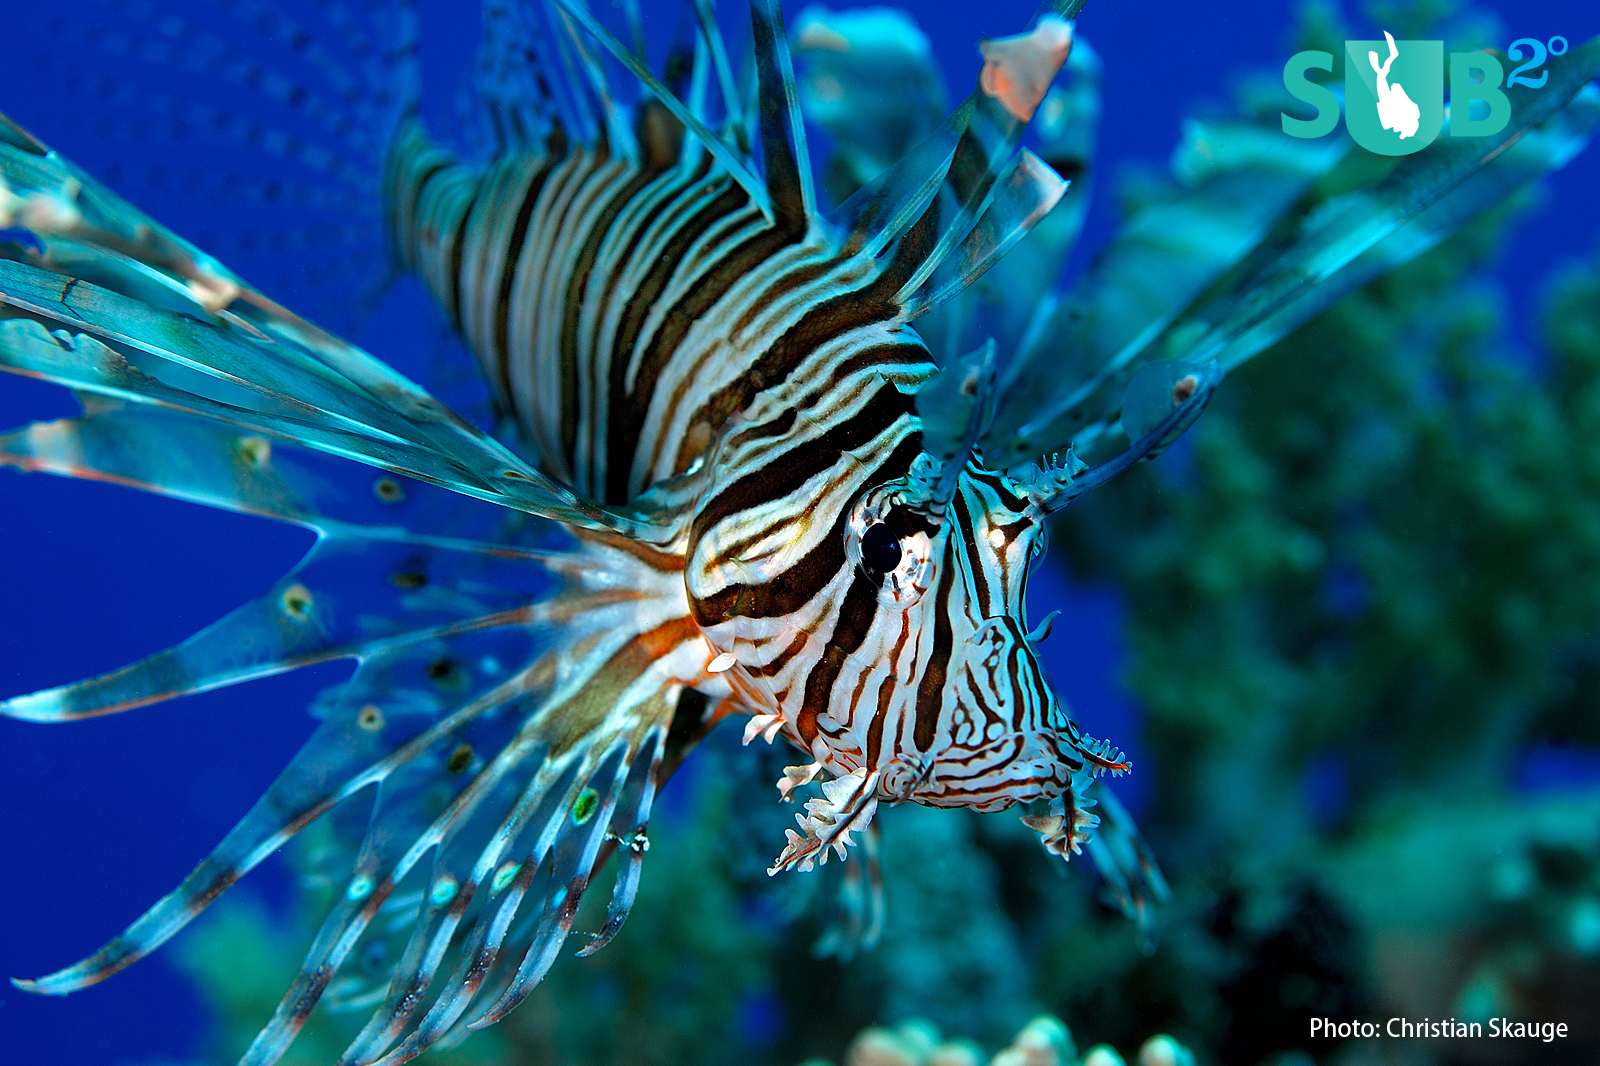 Curious divers should not touch these friendly and brave little fish. Their spiny fan-like projections are poisonous.